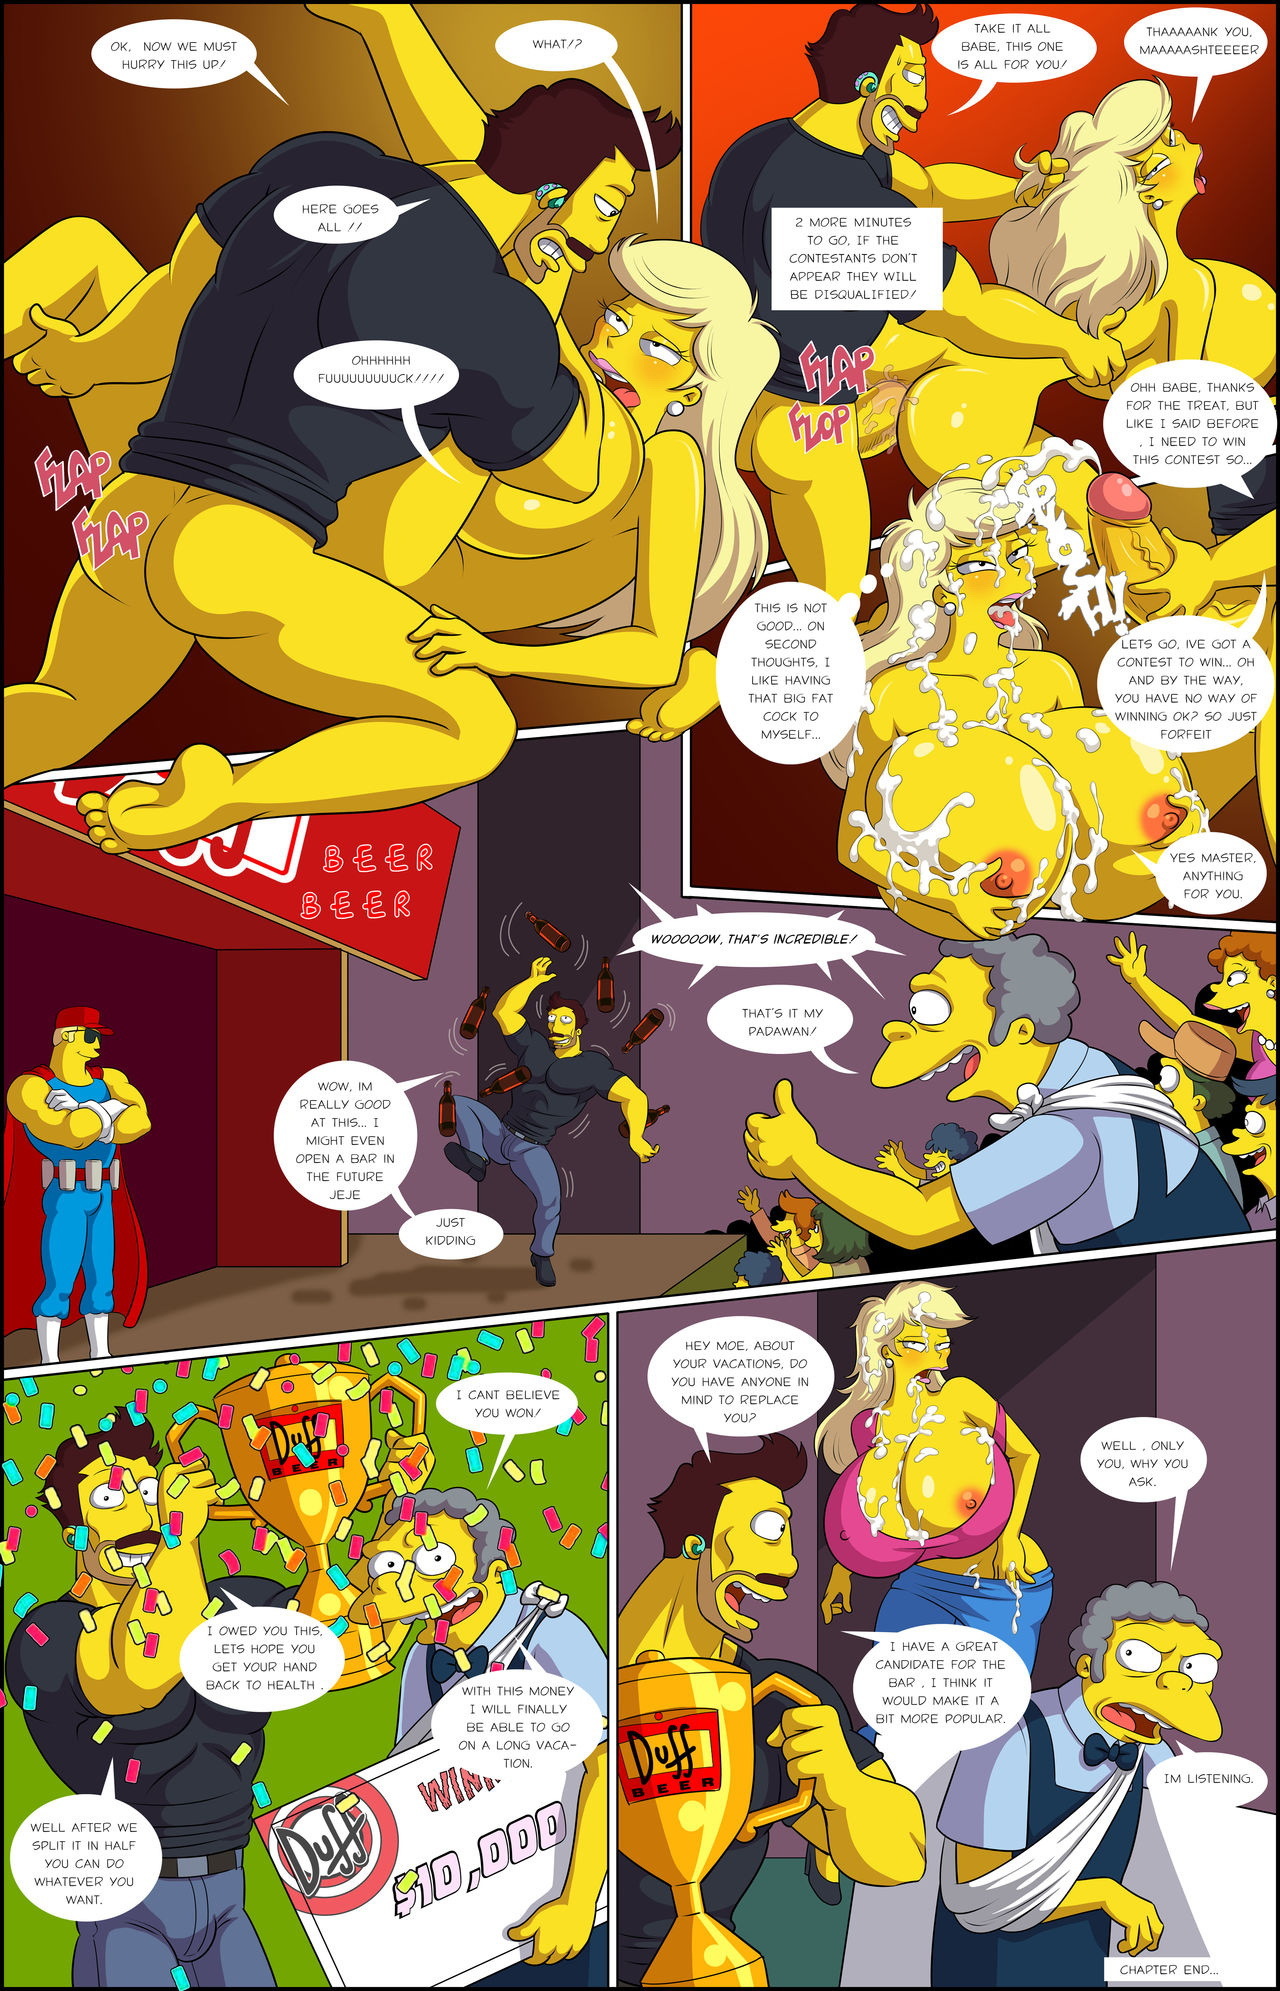 Darren's Adventure or Welcome To Springfield - Page 27